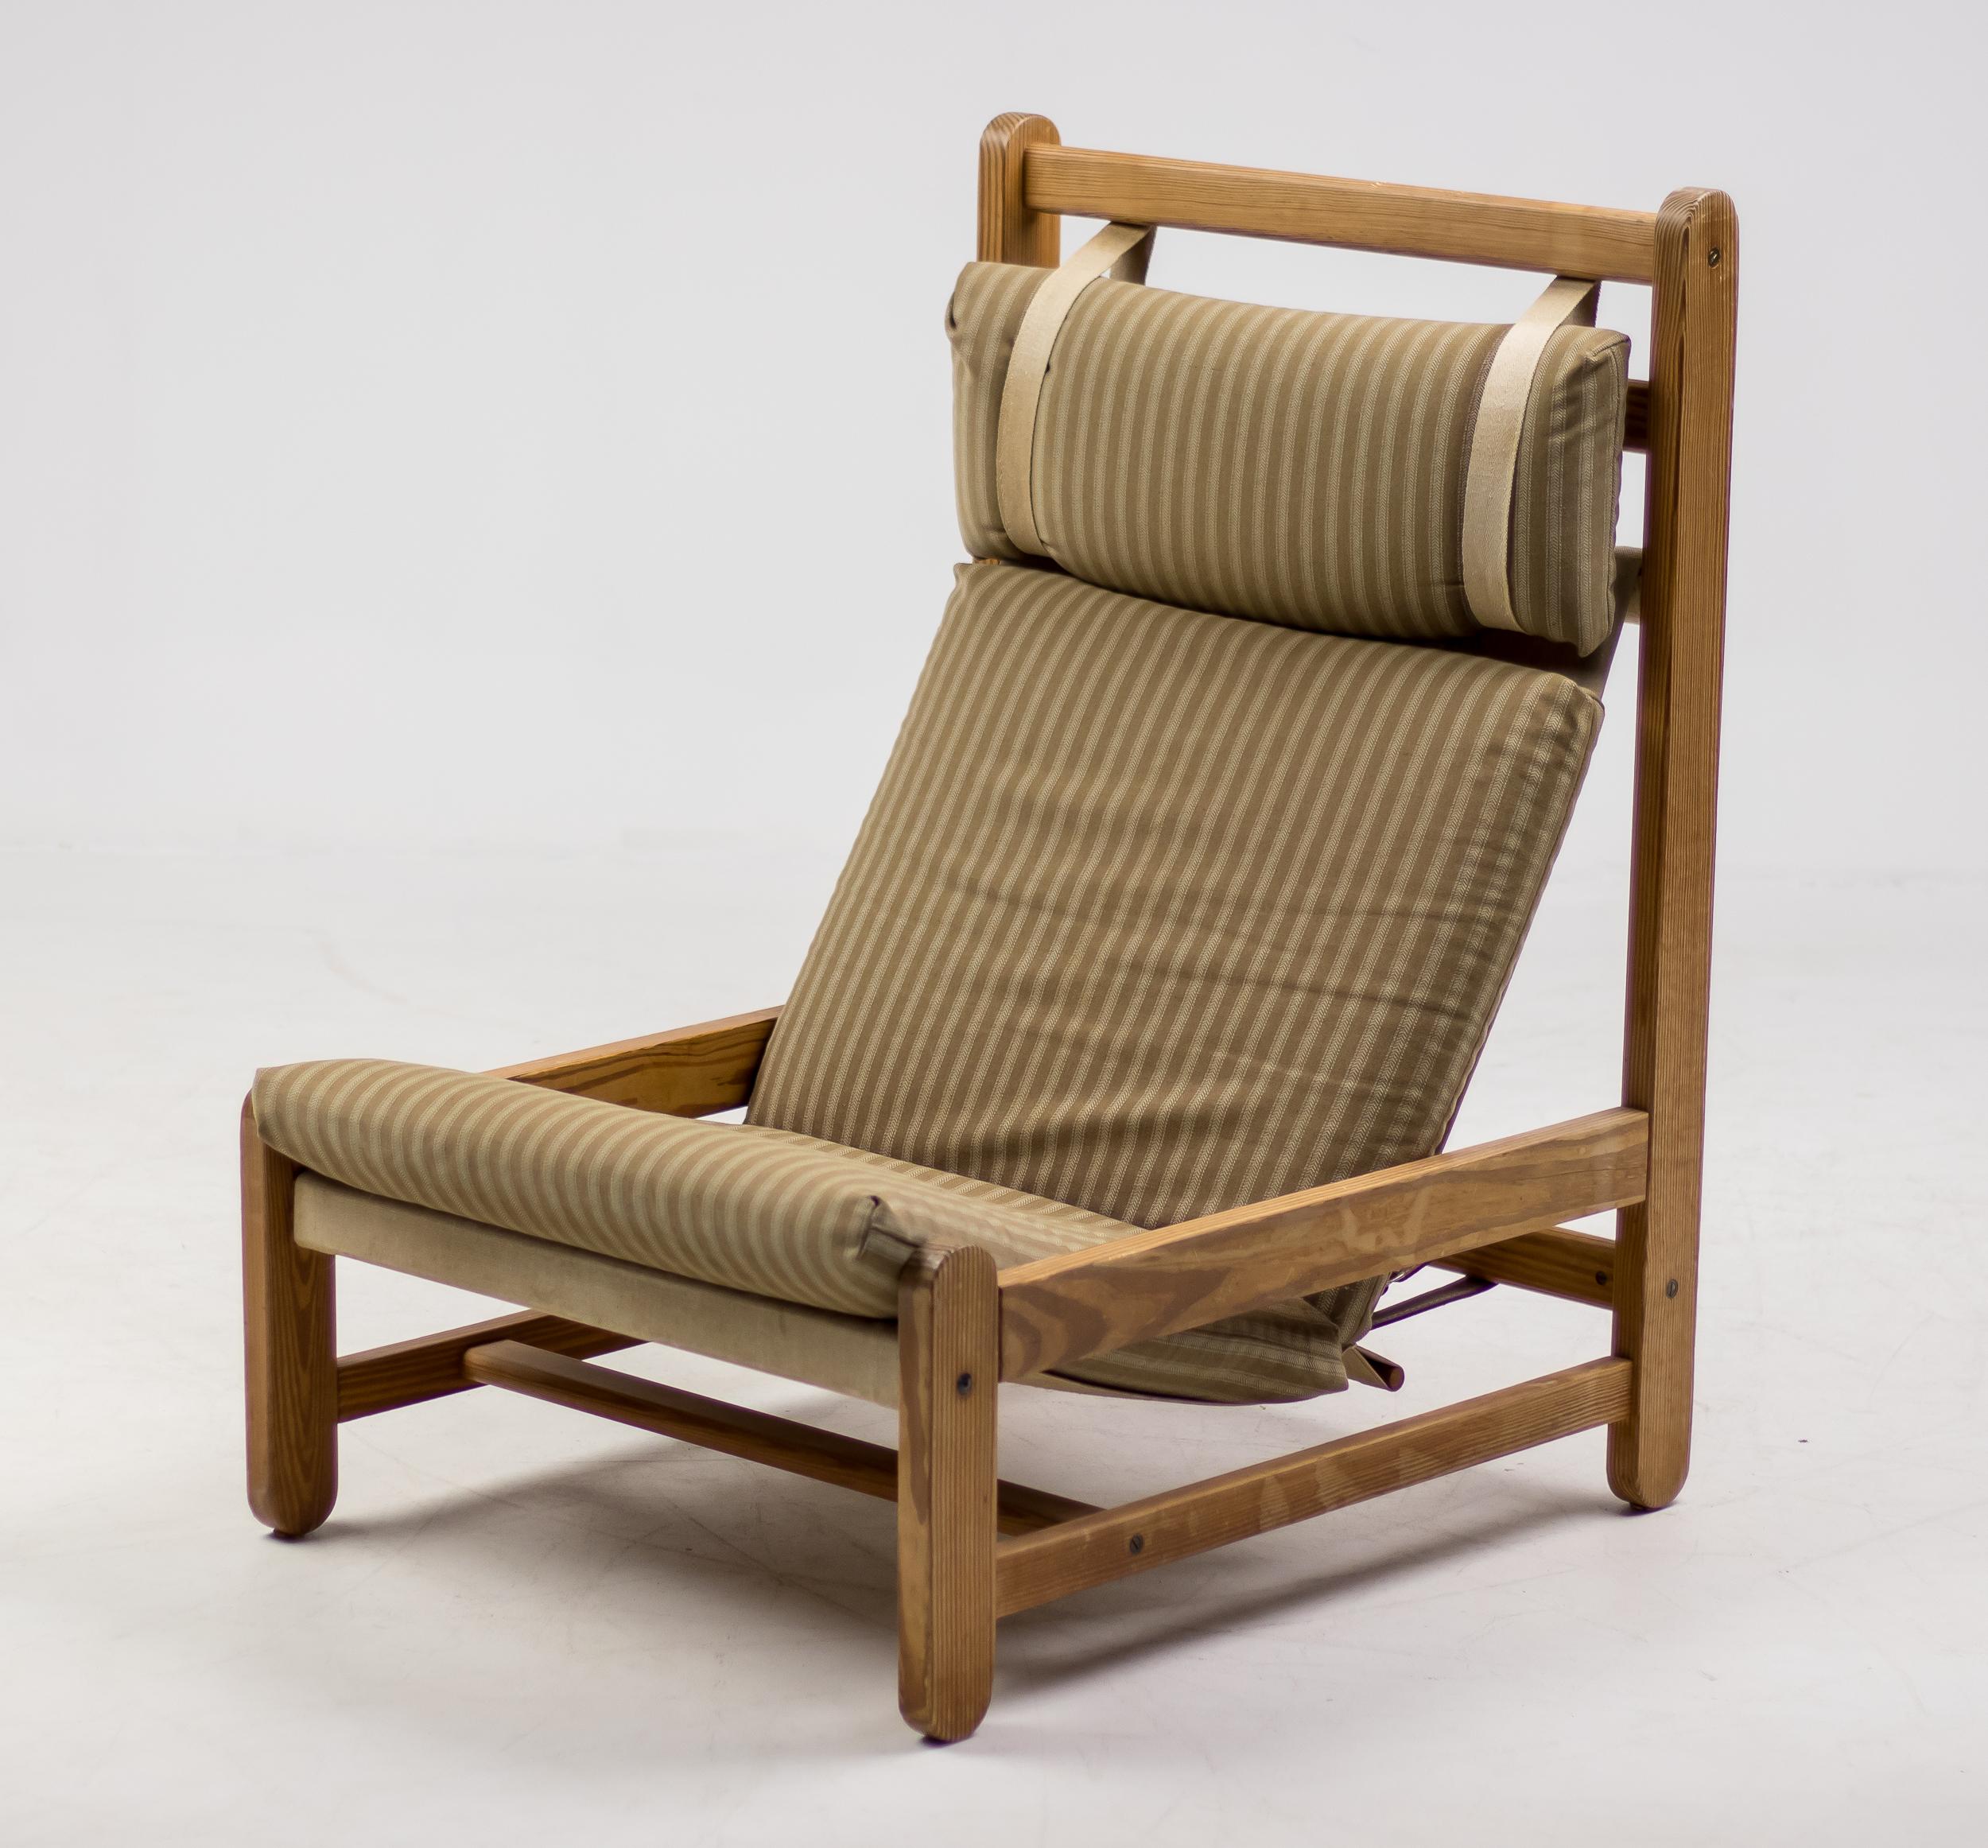 Danish lounge chair with Oregon pine frame and striped canvas sling seat.
Wonderful all original vintage condition.